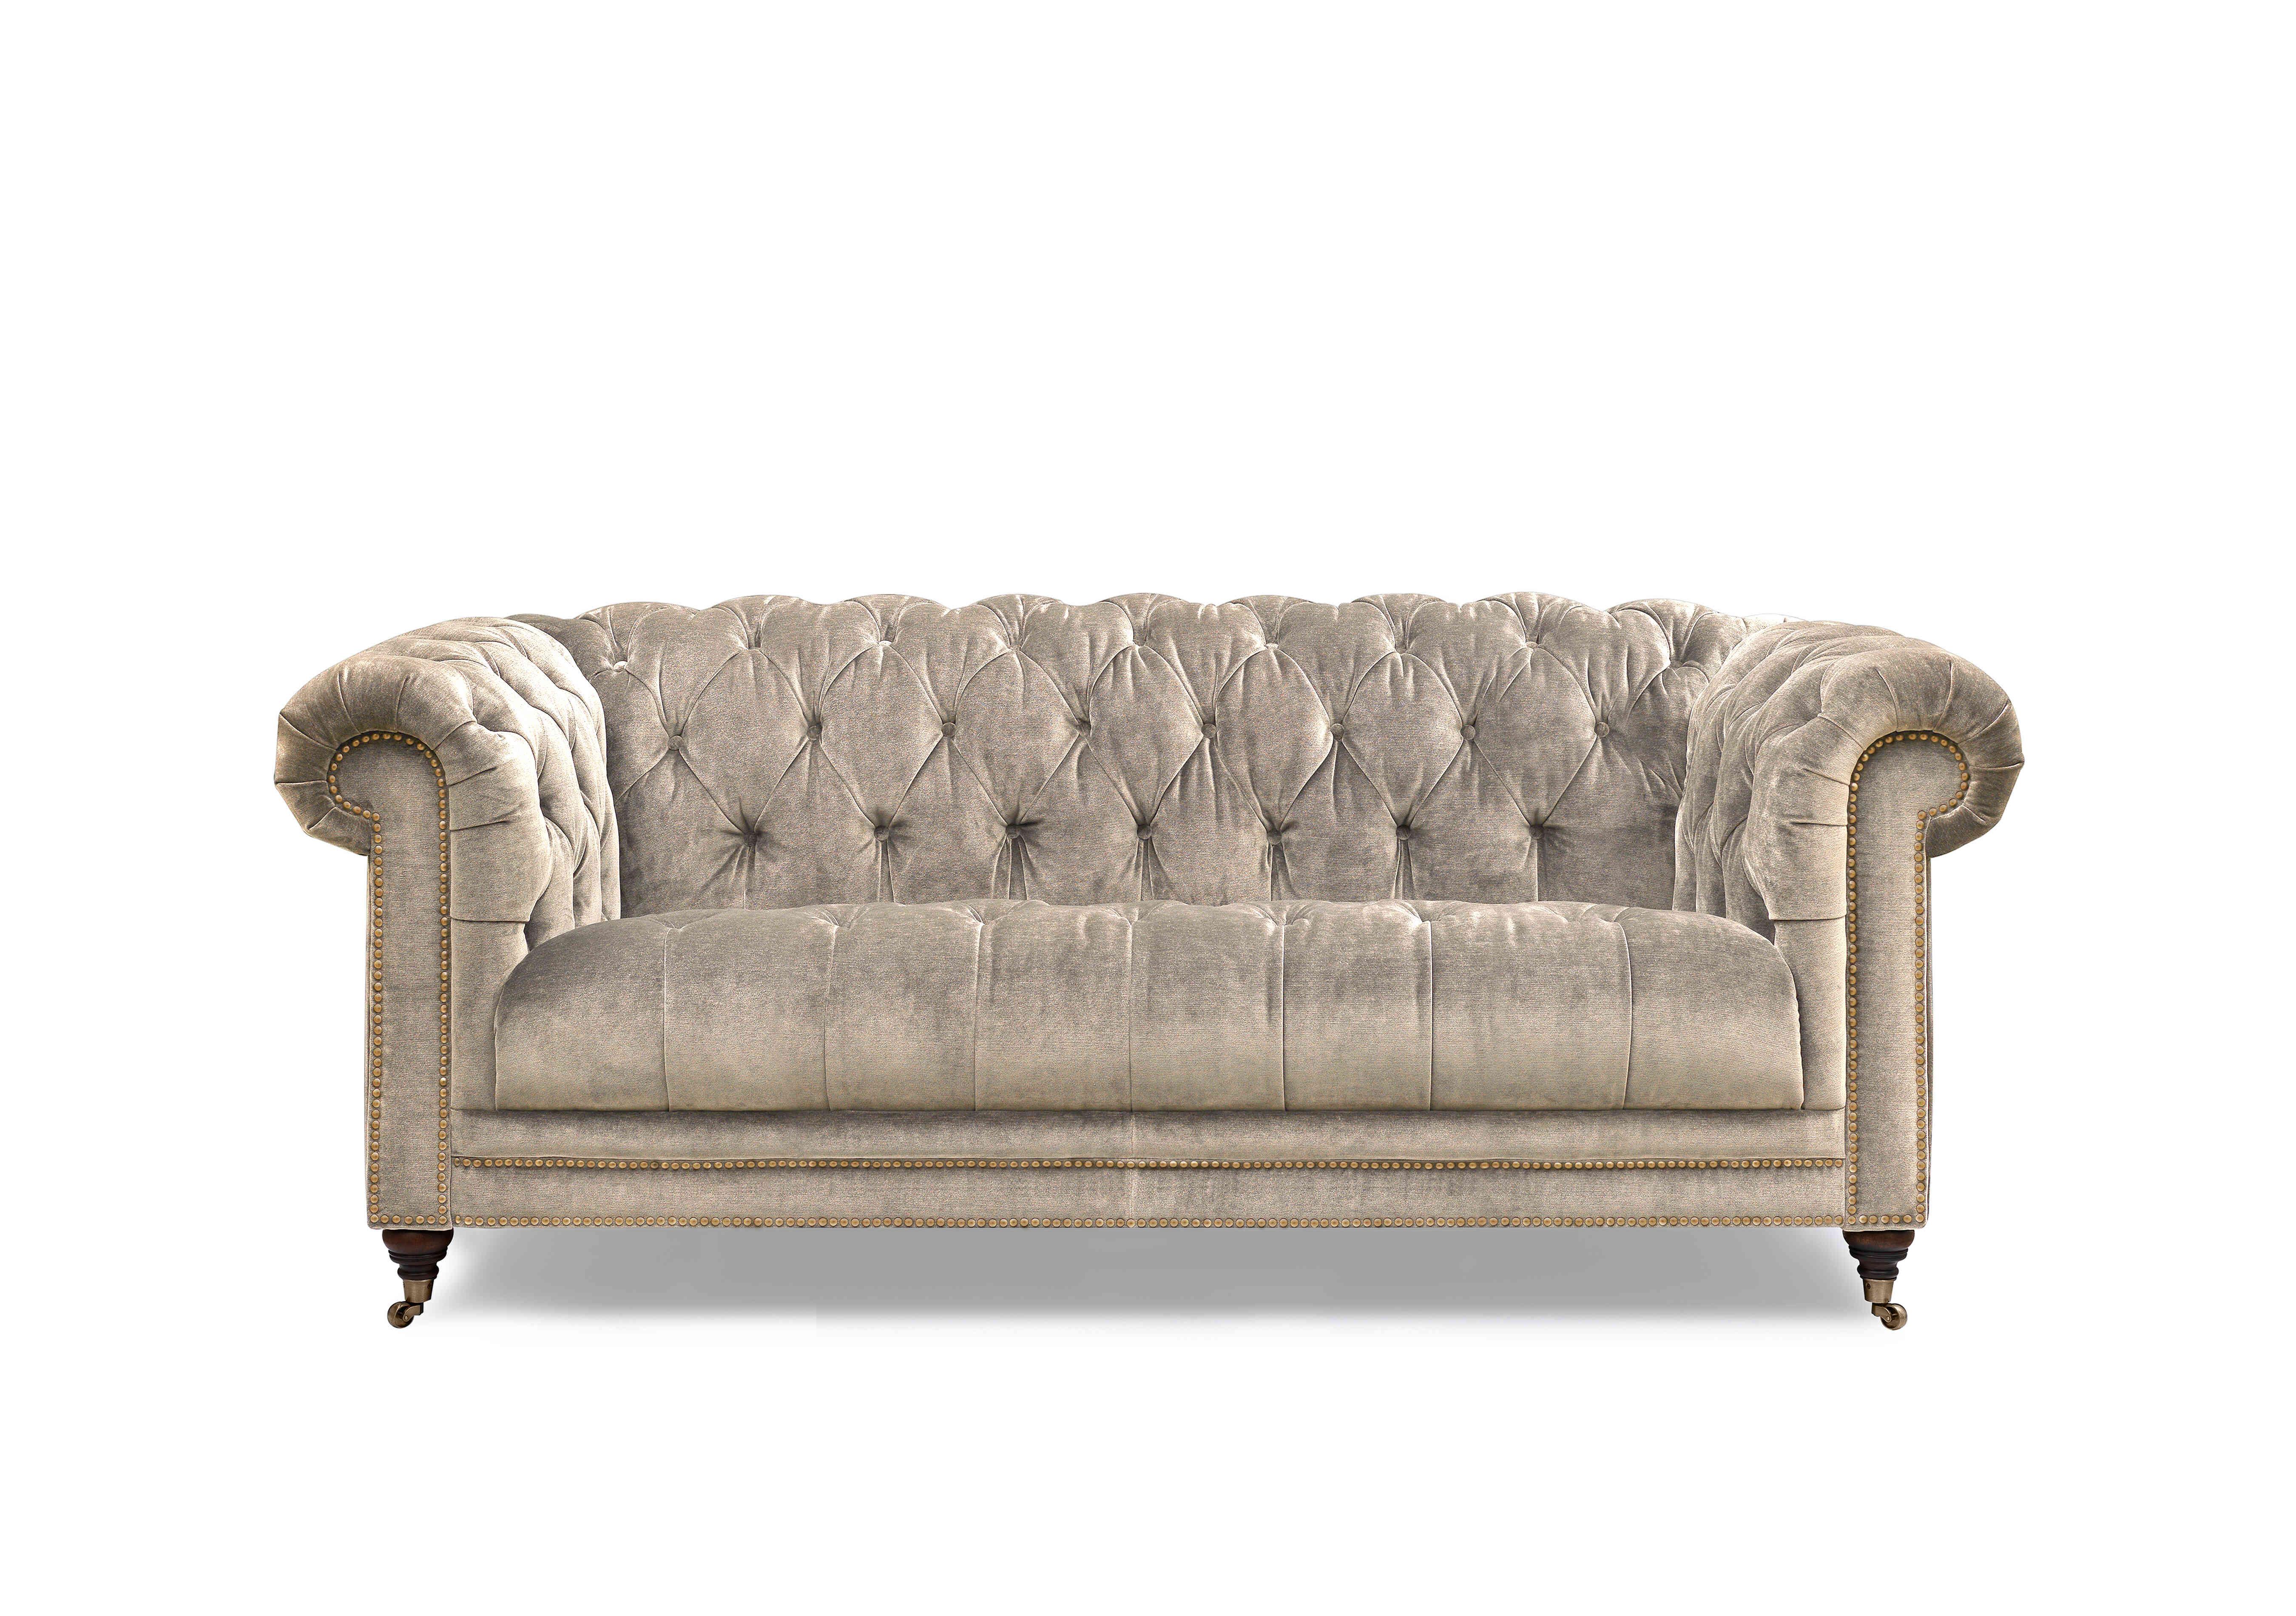 Walter 3 Seater Fabric Chesterfield Sofa with USB-C in X3y1-W022 Barley on Furniture Village